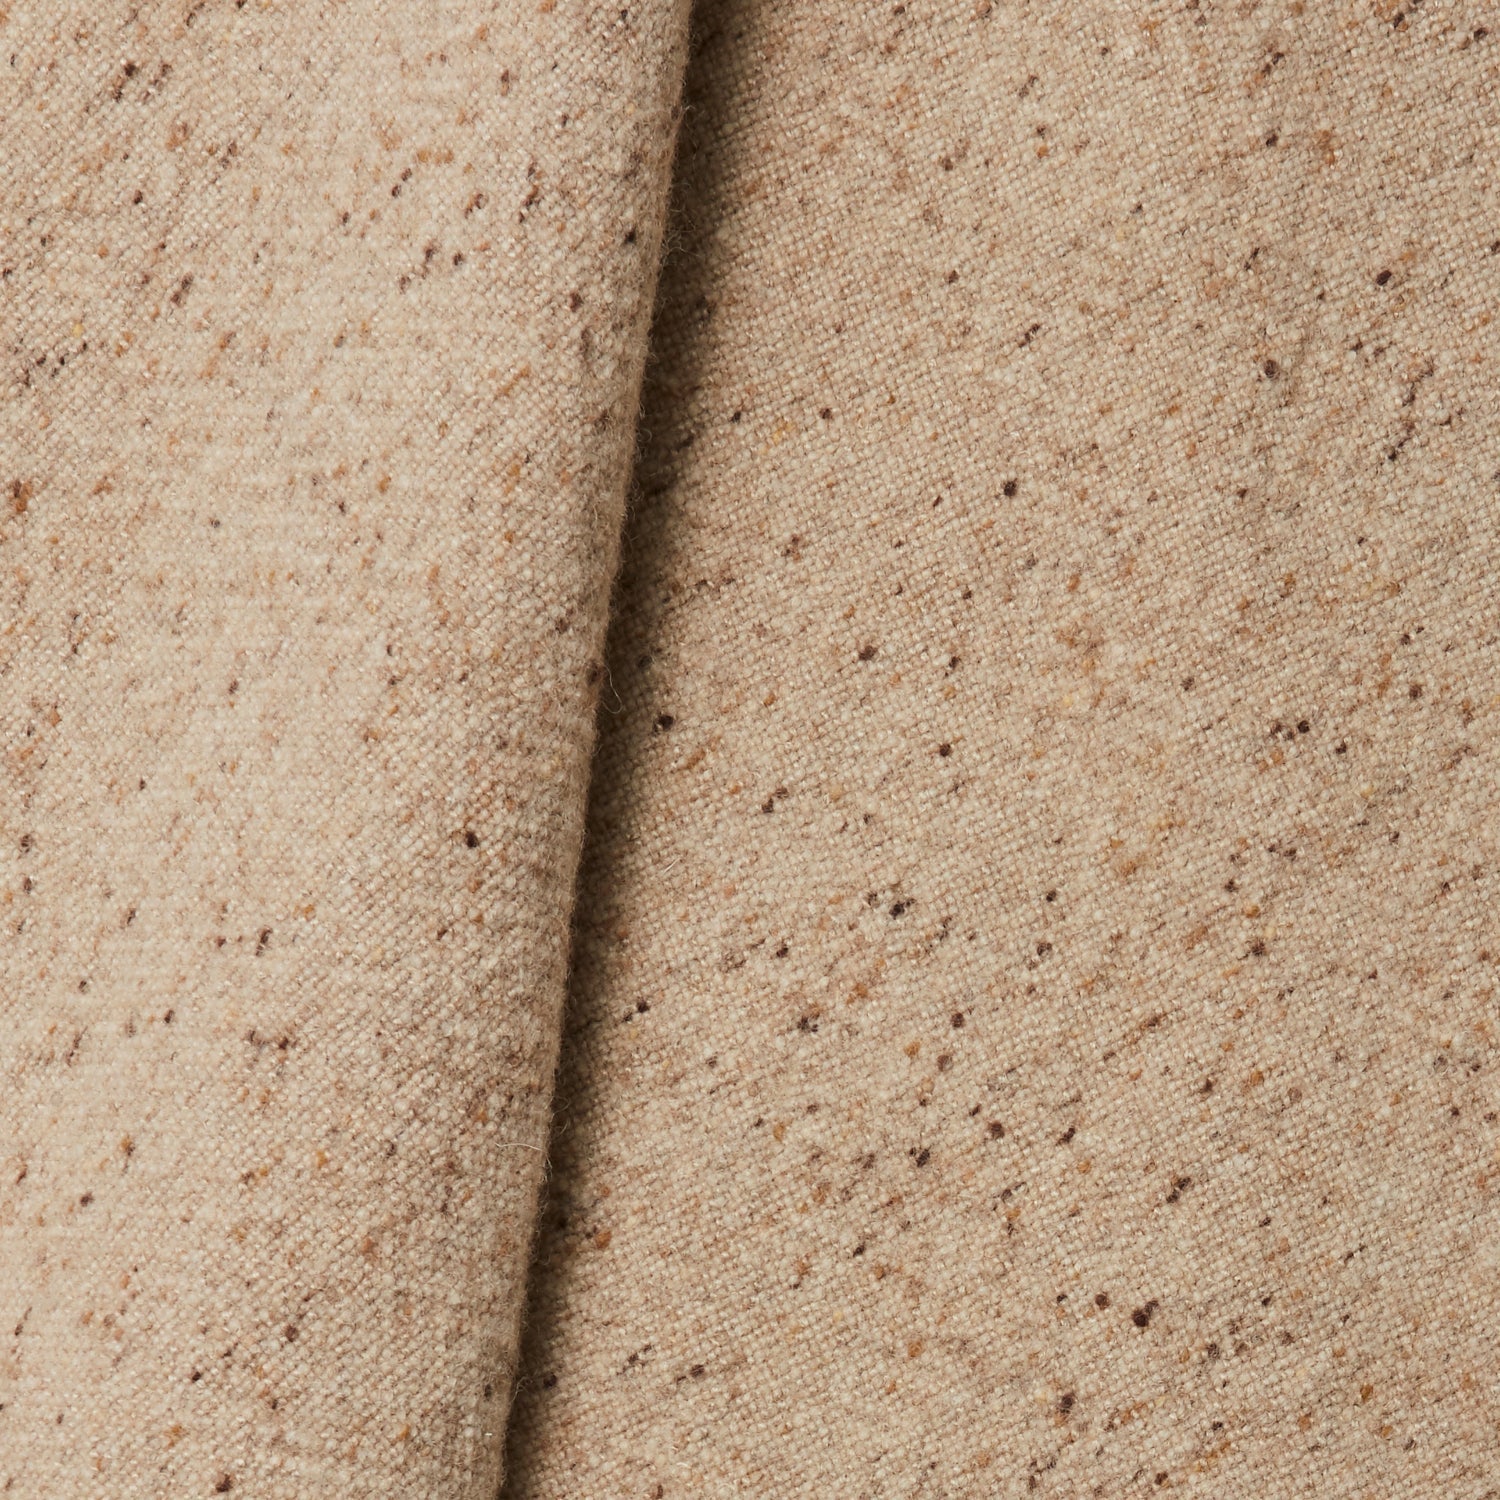 A draped swatch of blended linen-wool mix fabric in a flecked tan color.